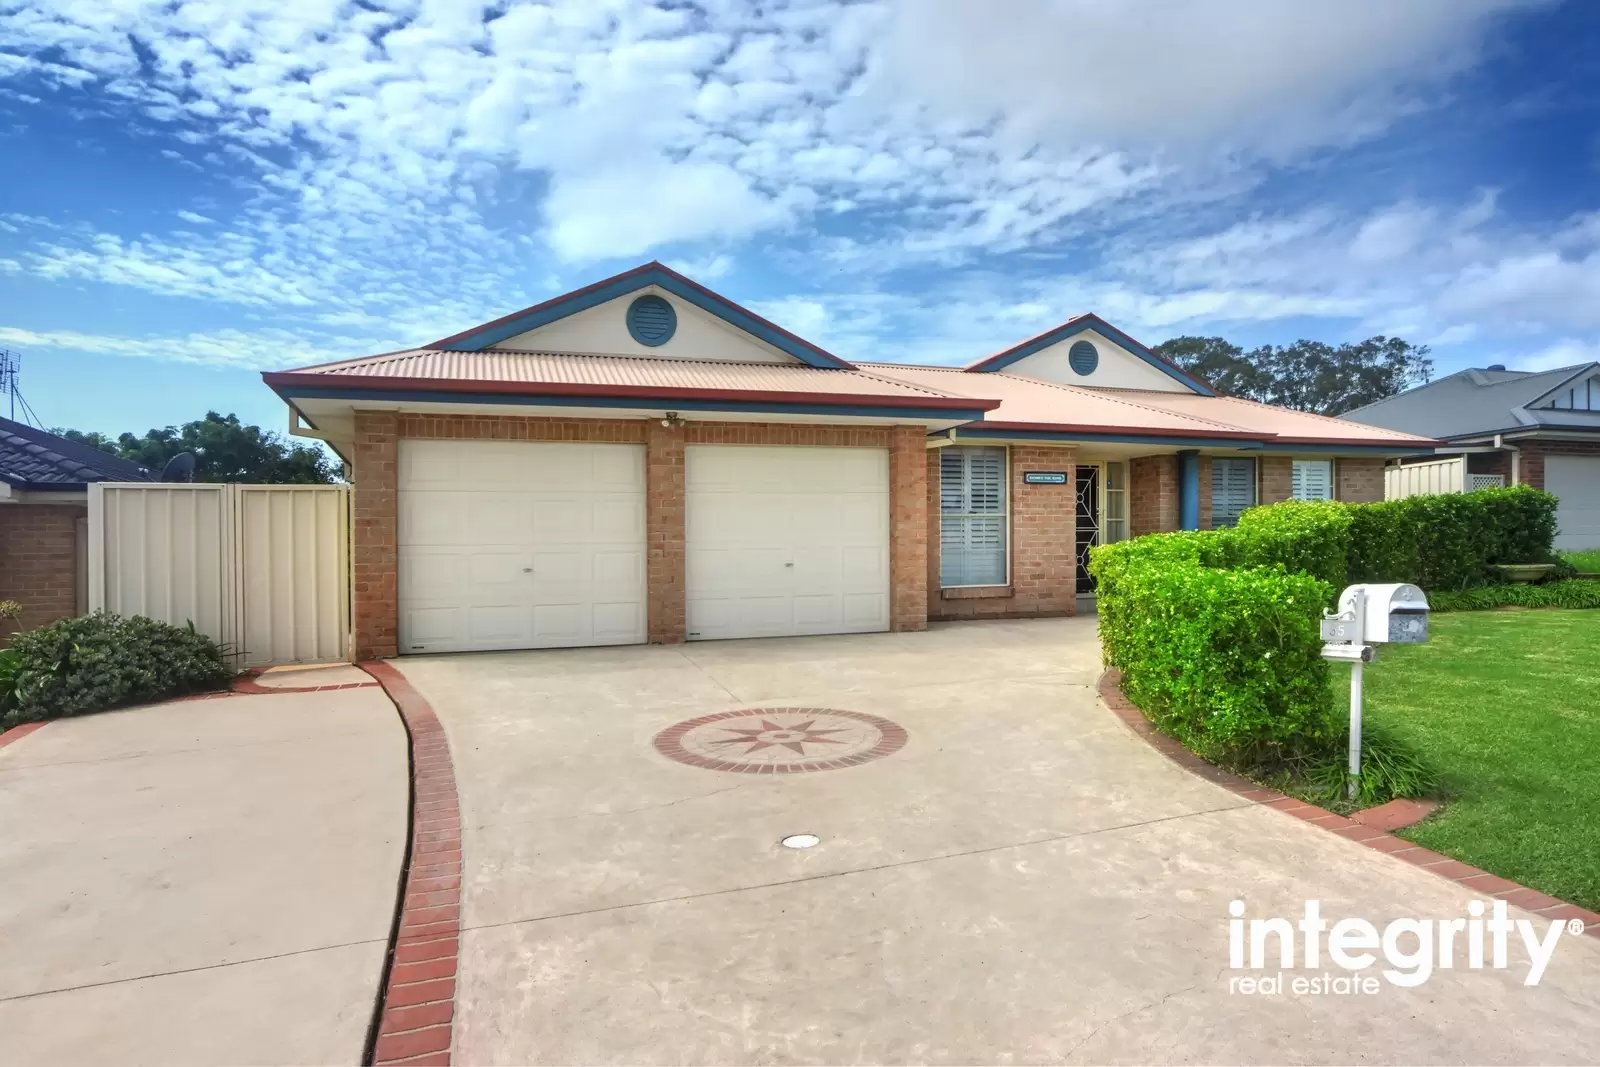 55 Burradoo Crescent, Nowra Sold by Integrity Real Estate